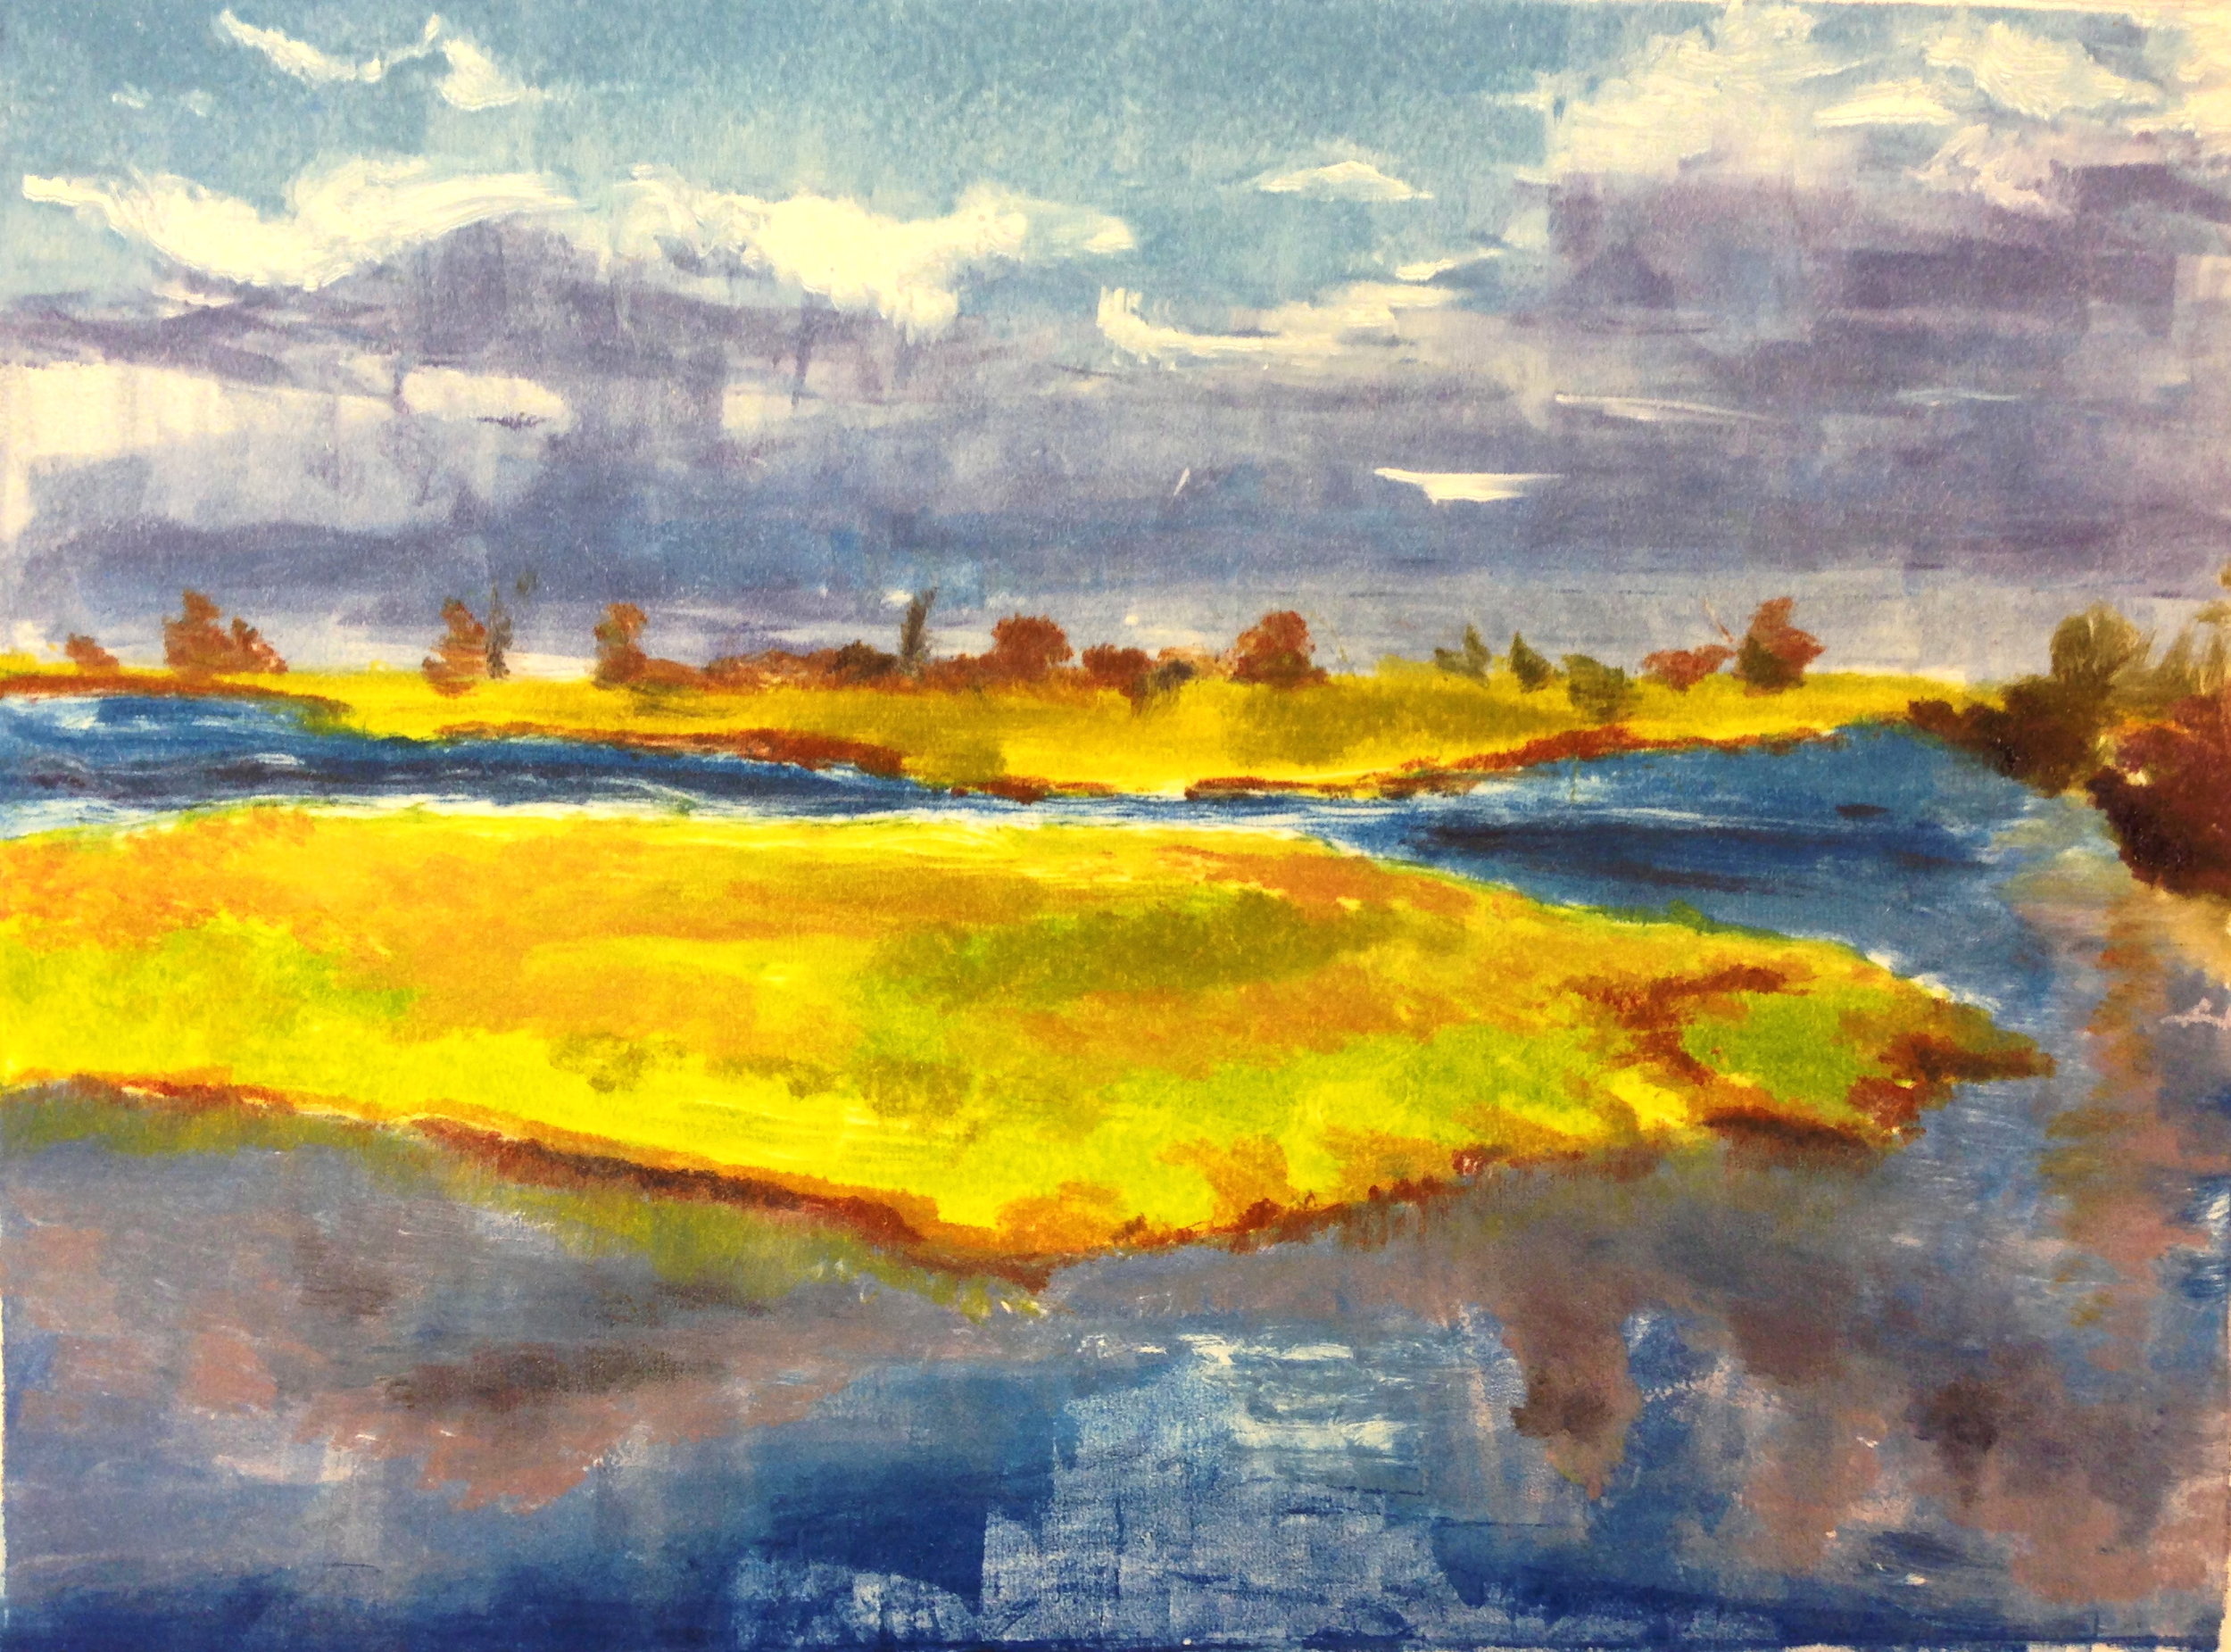   Plumb Island    water based monotype on paper&nbsp;   **SOLD**  